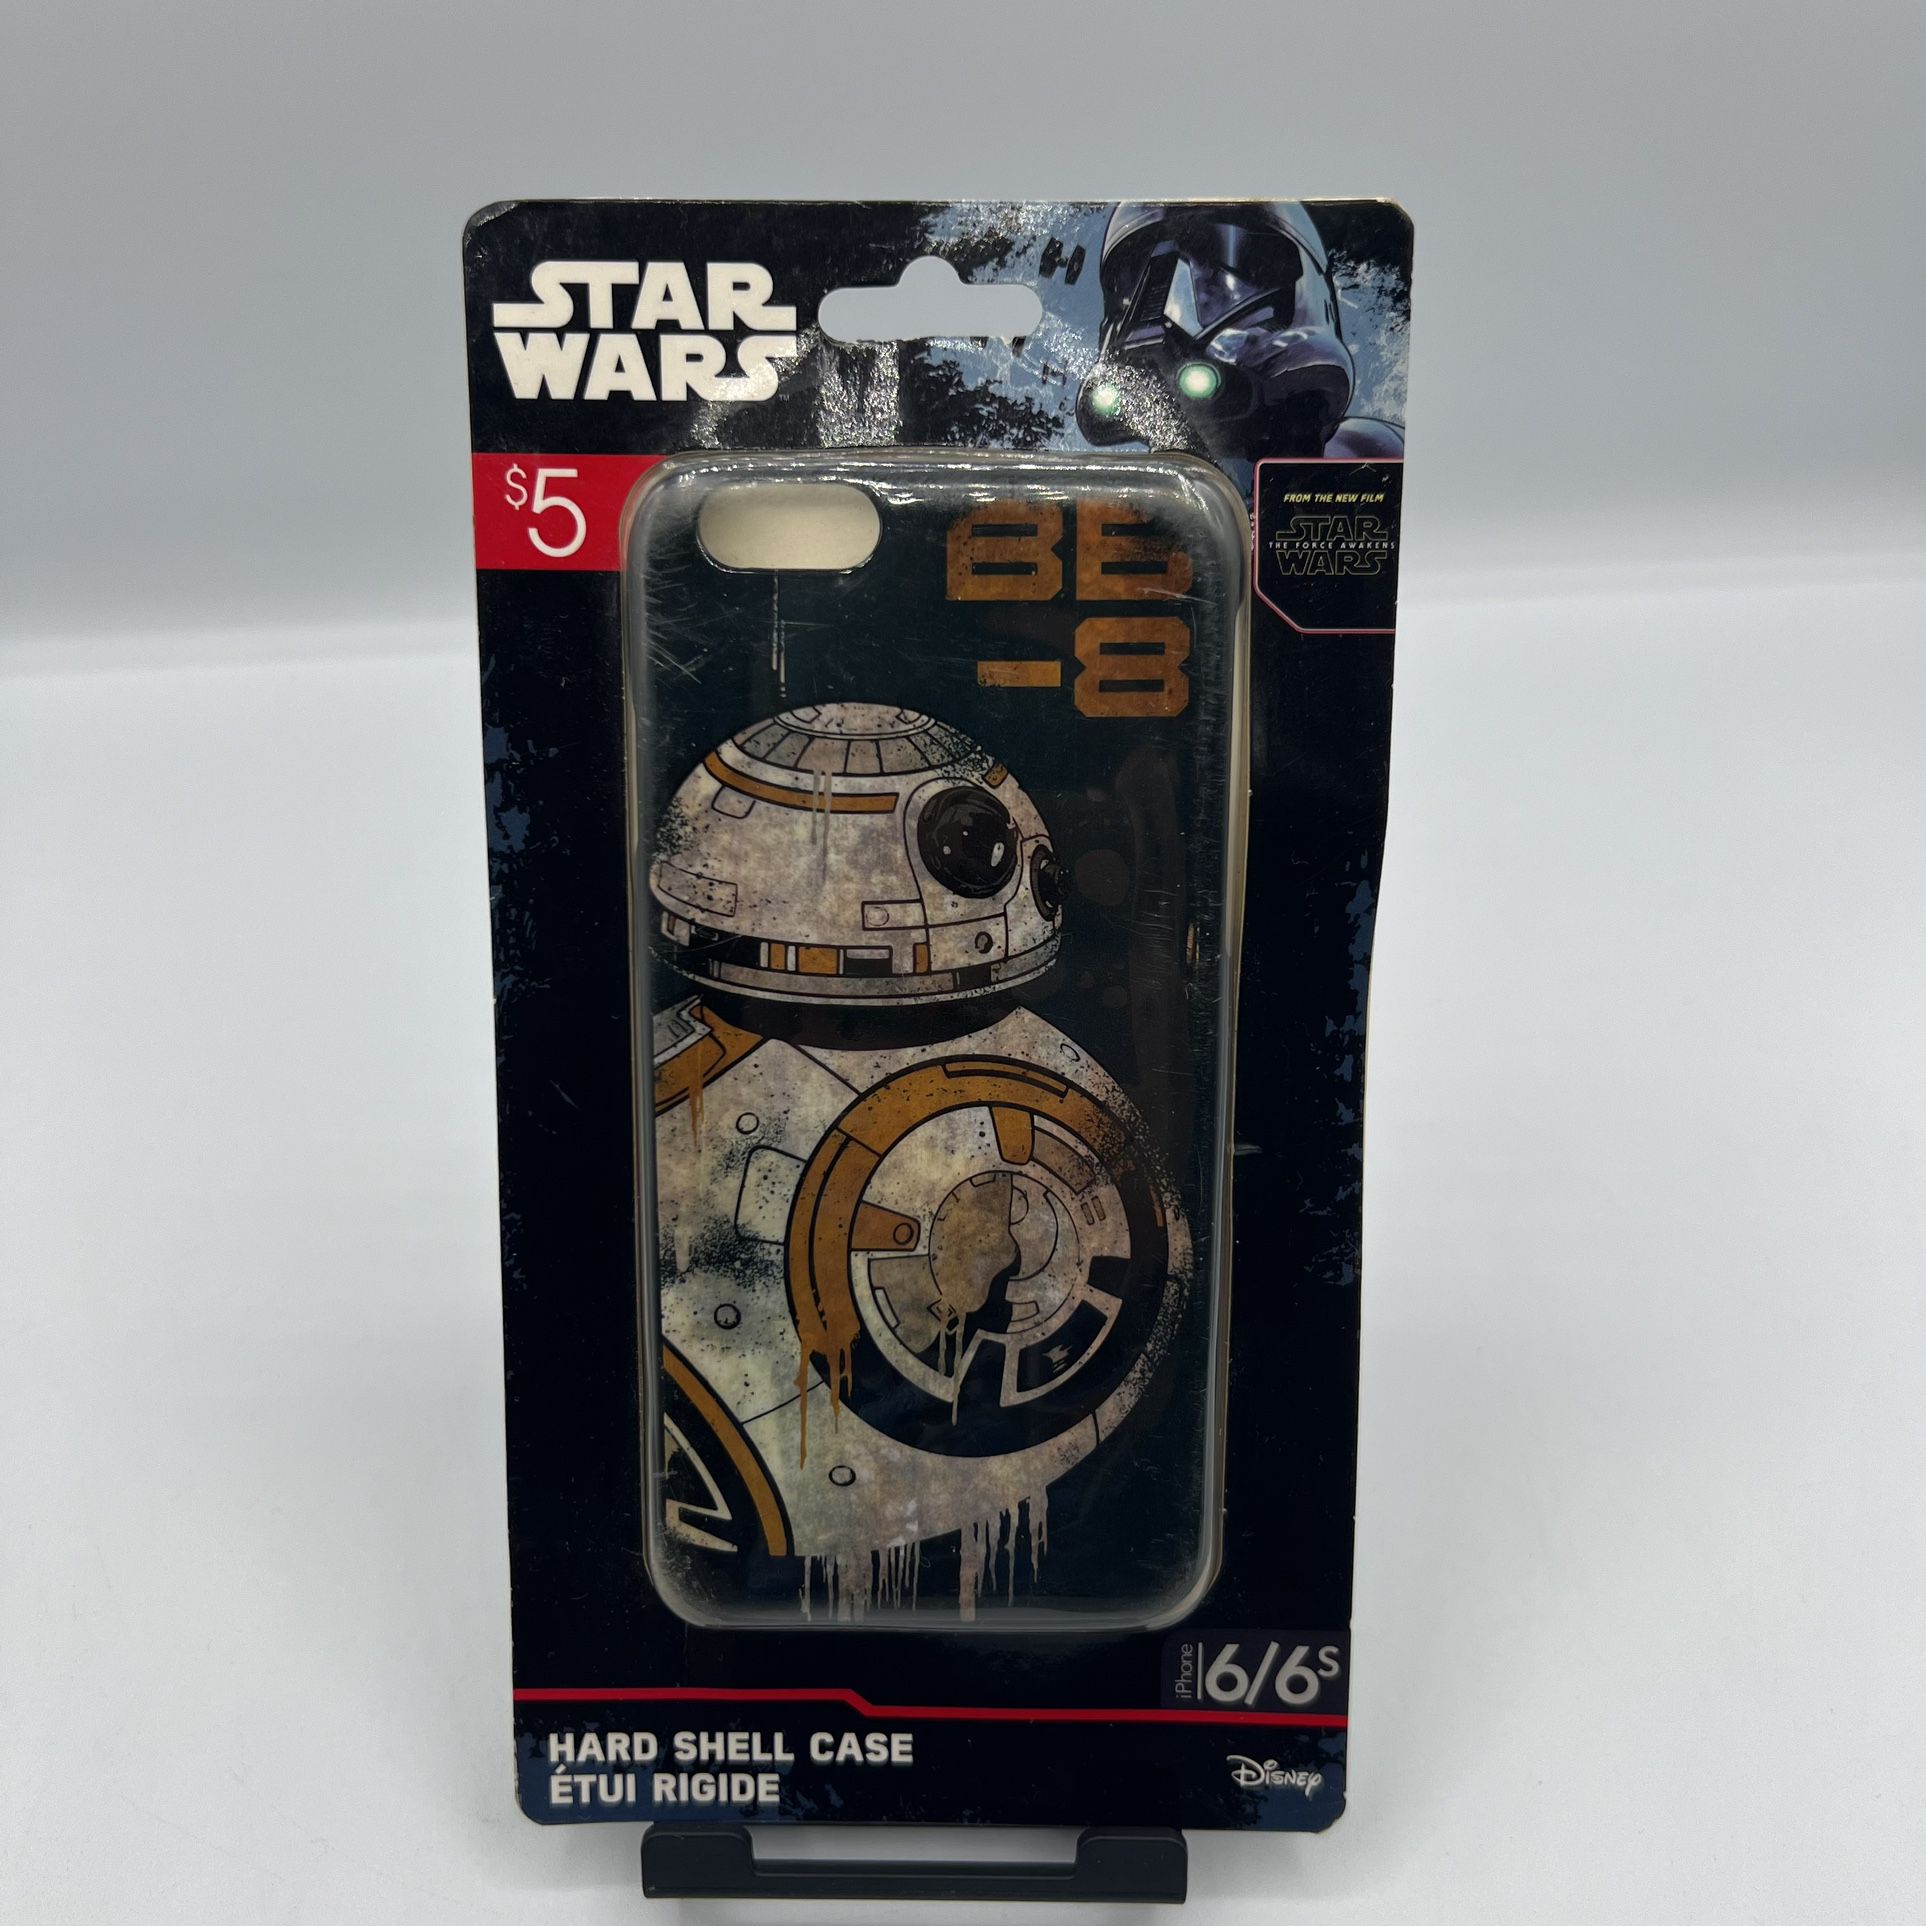 STAR WARS BB-8 IPHONE 6/6S HARD SHELL CASE NEW UNOPENED